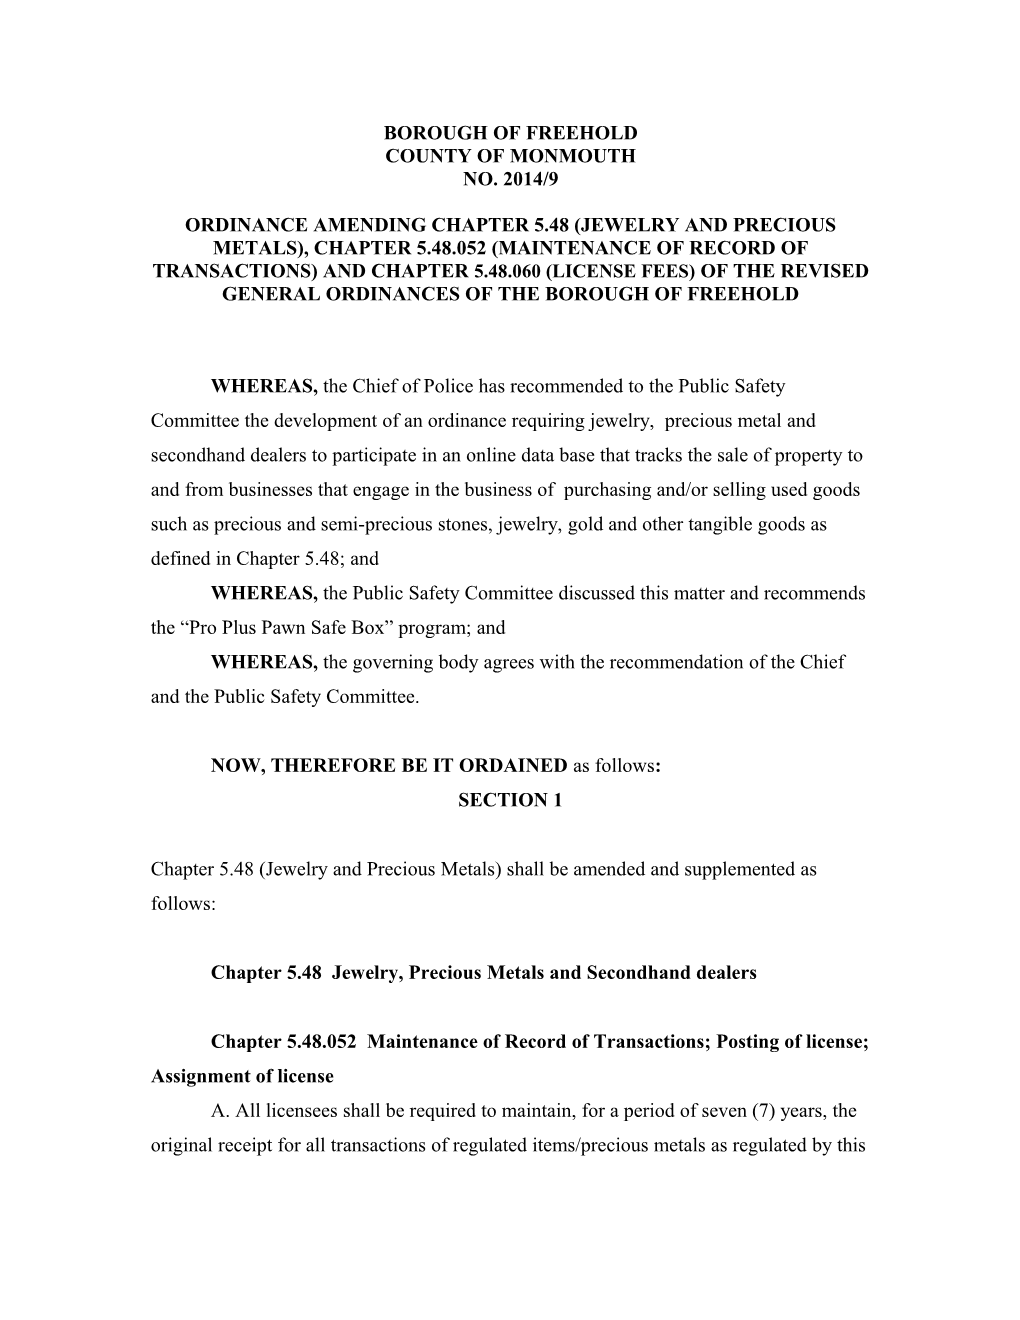 Ordinance Amending Chapter 10 (Vehicles and Traffic), Section 10